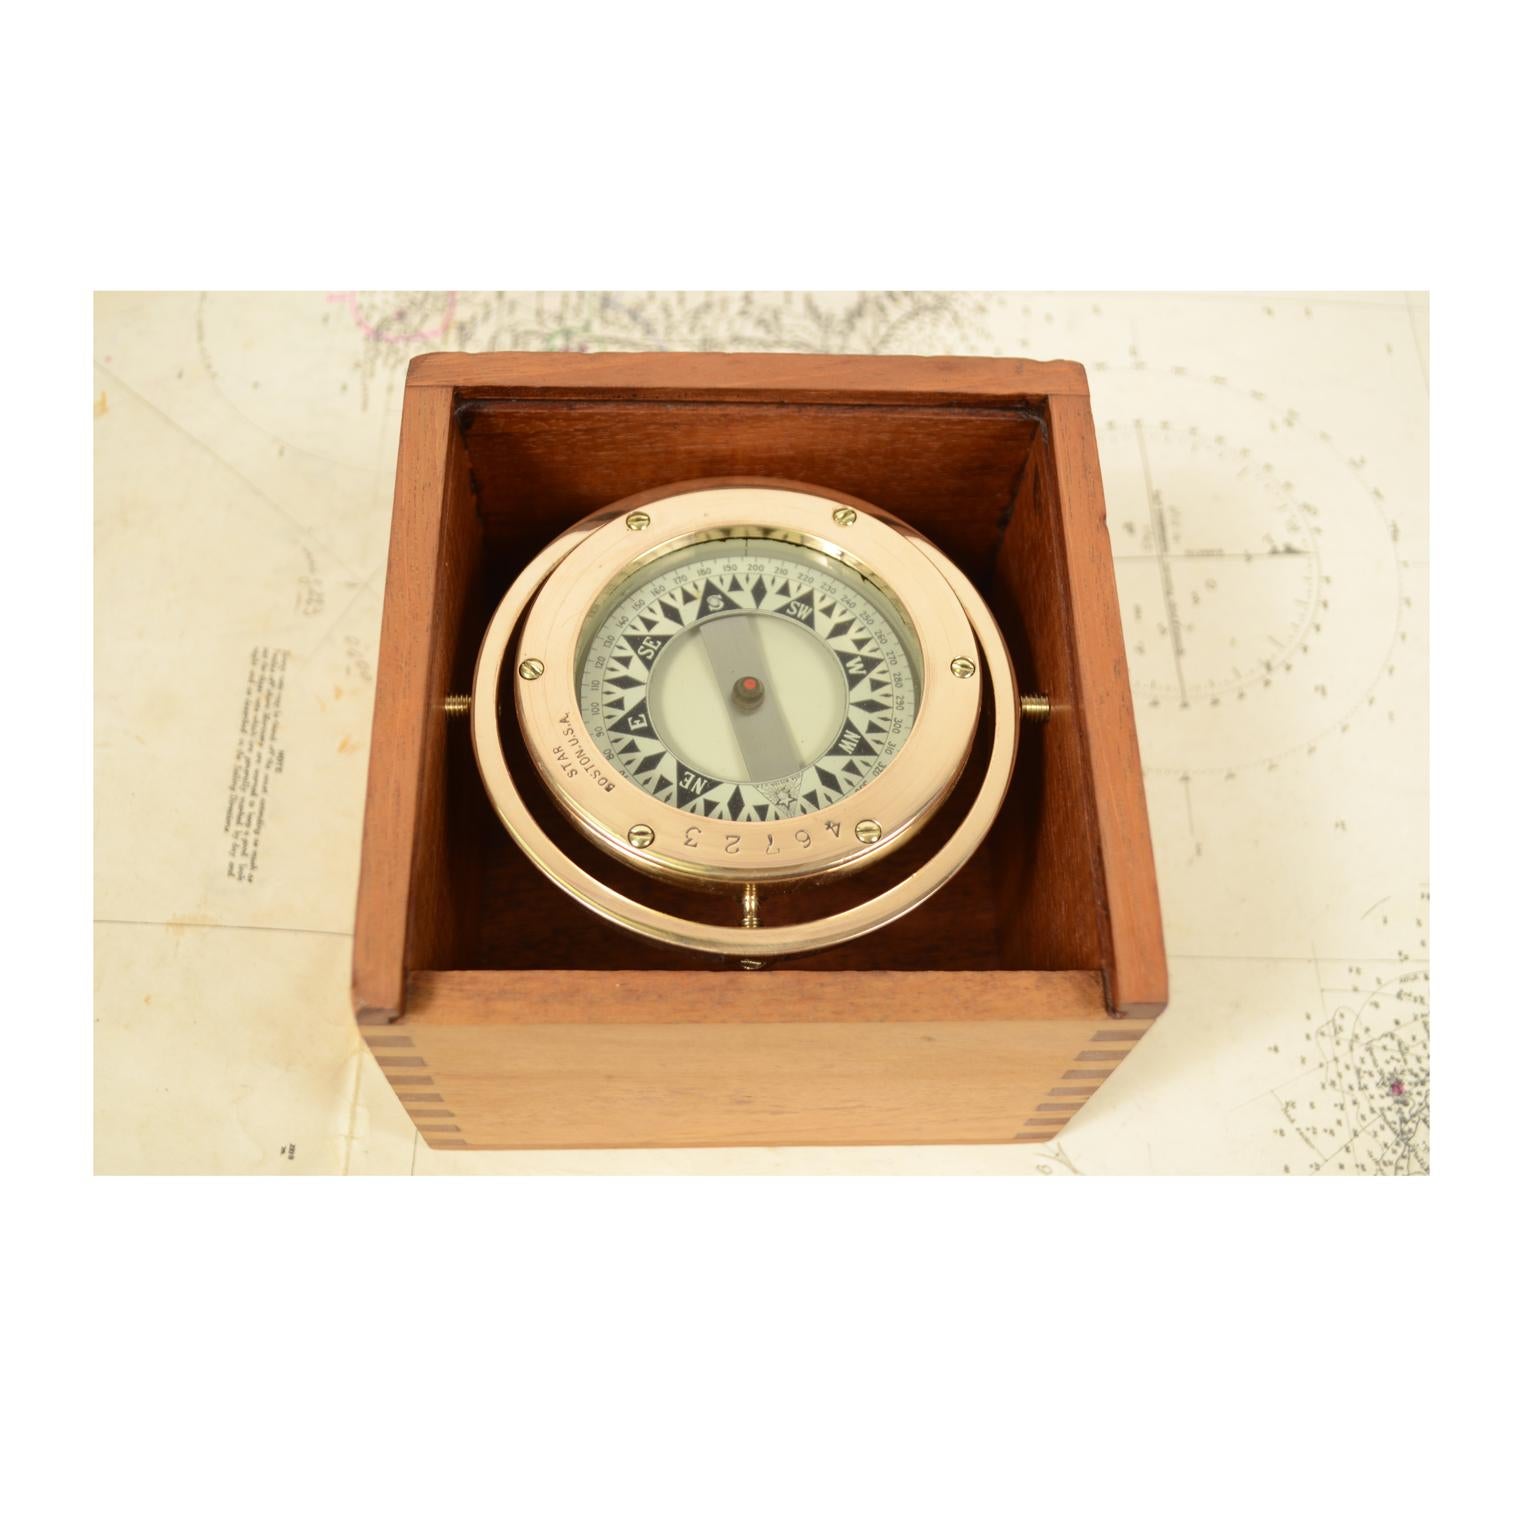 Liquid compass on universal joint signed STAR Boston 46723 from the early 1900s, complete with original wooden box with slot cover and mounted on a walnut board. The compass consists of a cylindrical box made of brass and bronze, on the bottom of